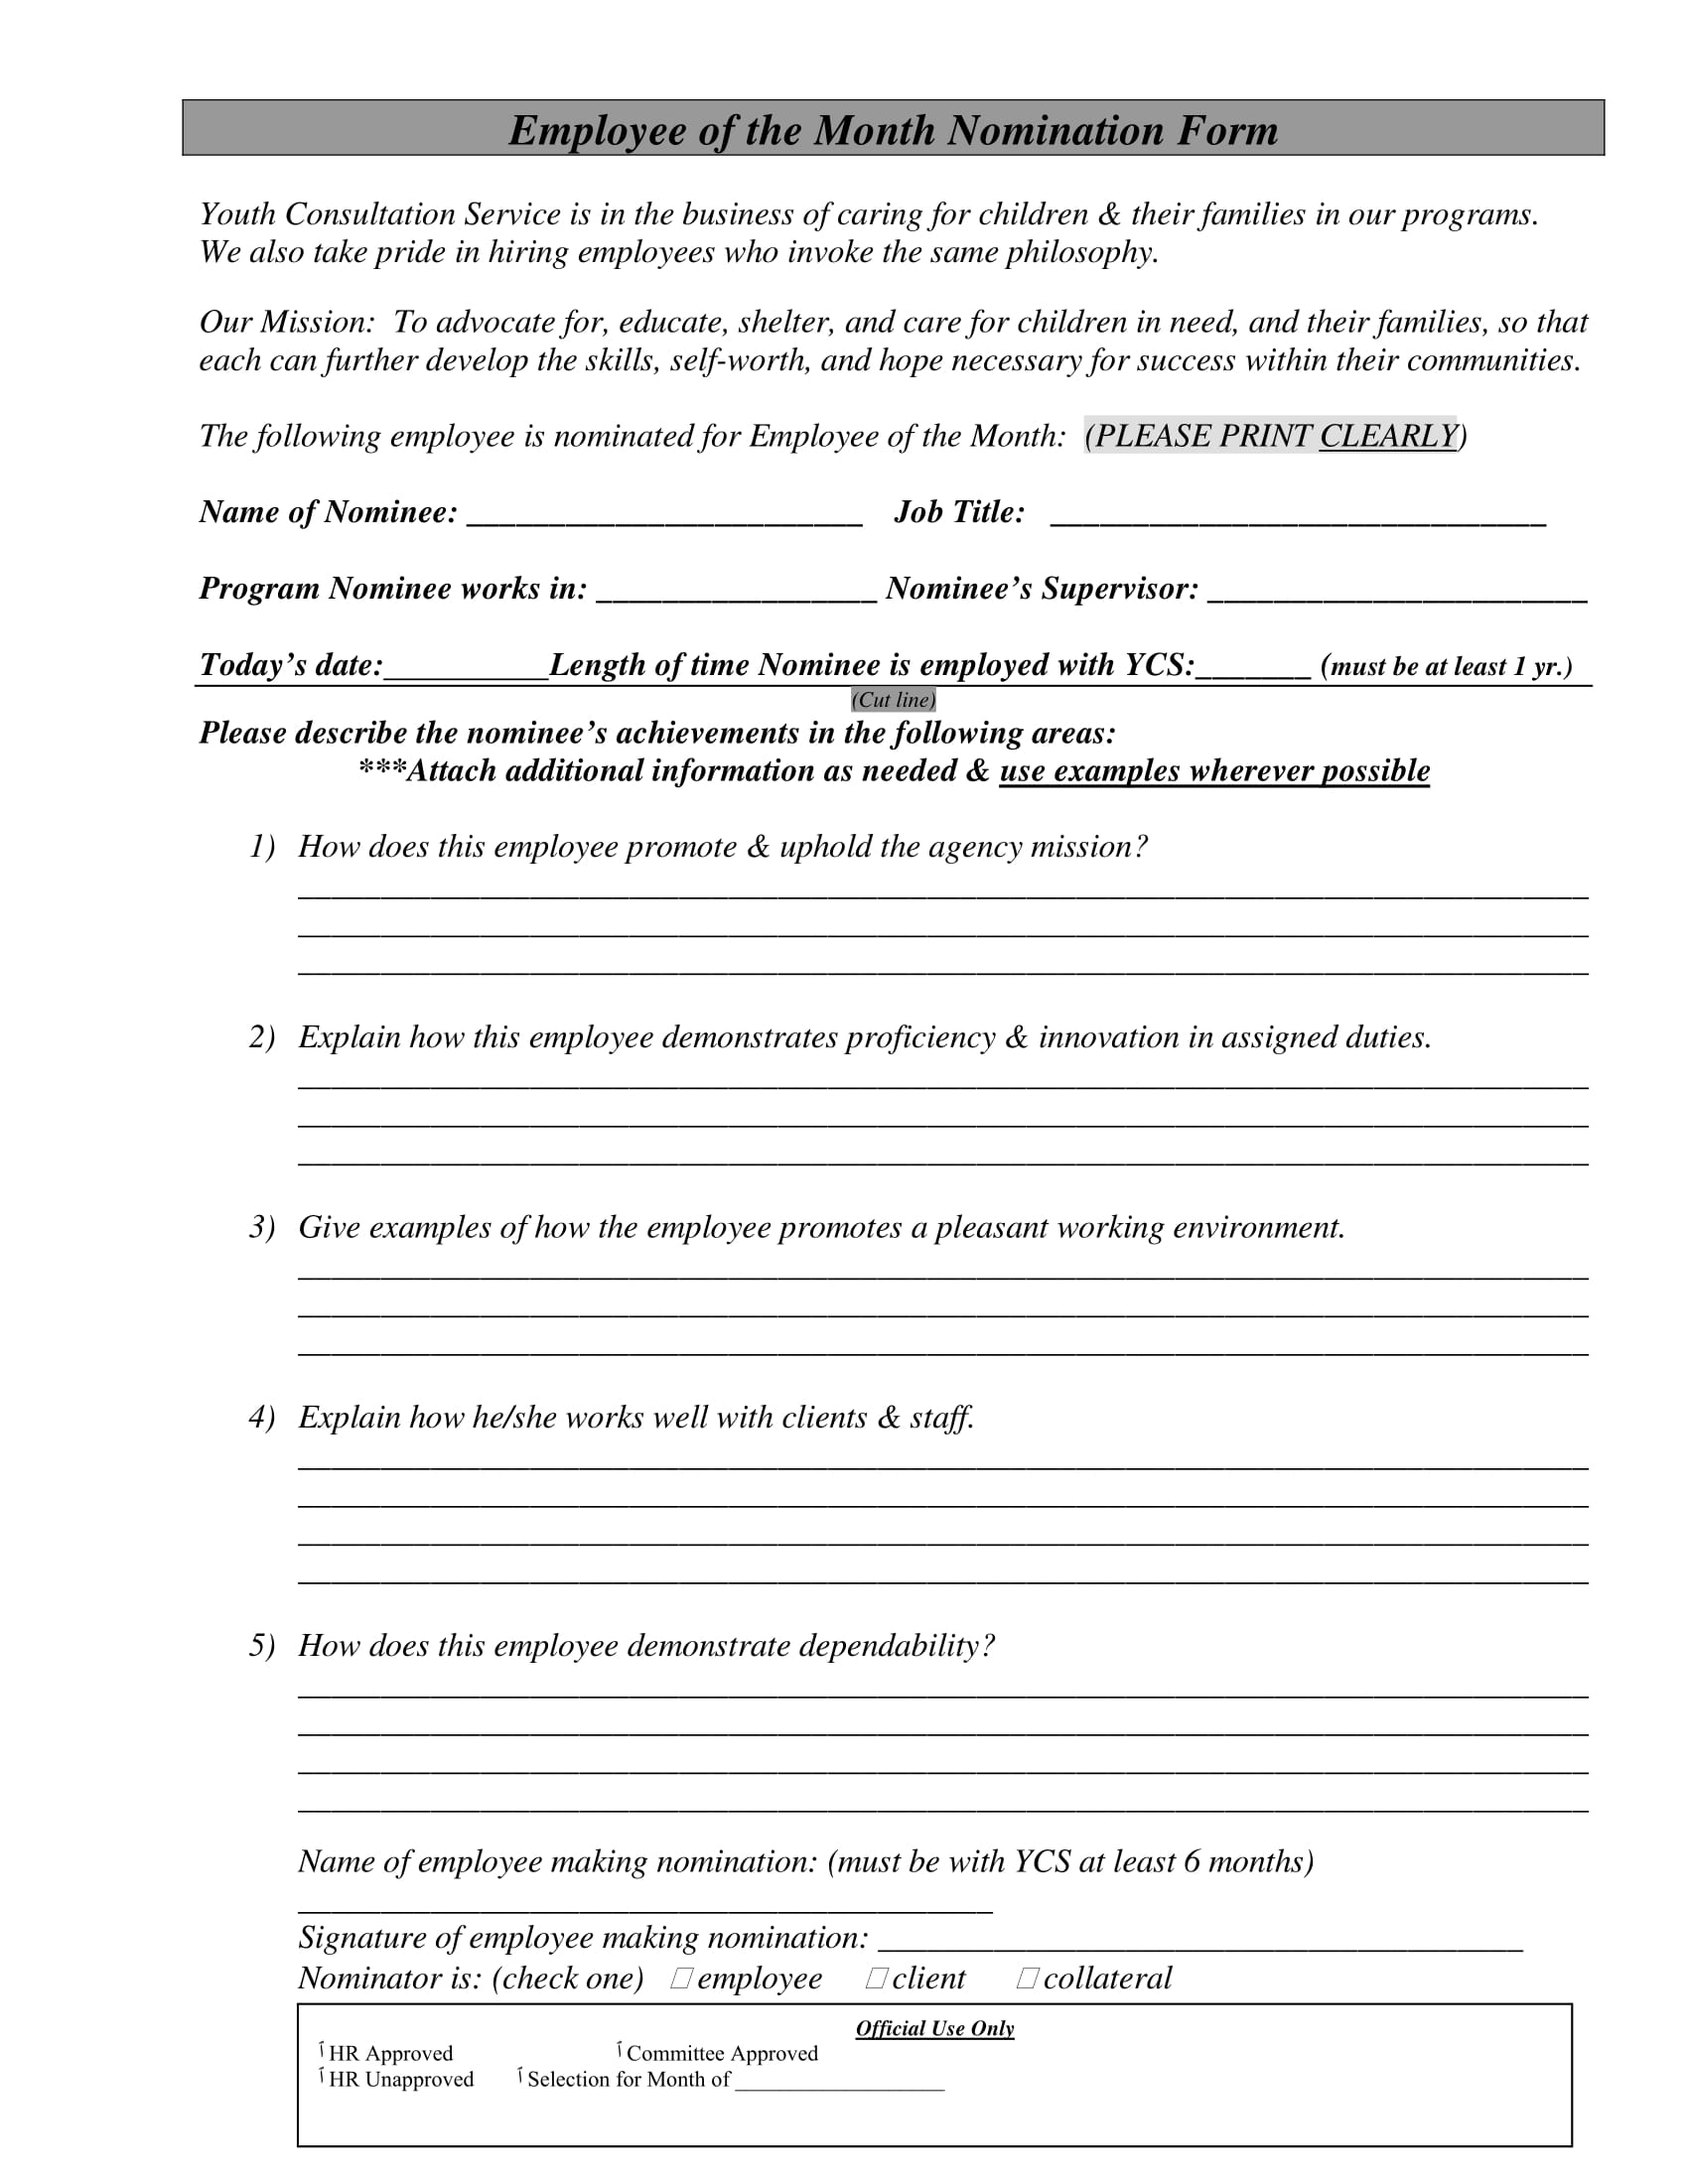 employee of the month nomination form 3